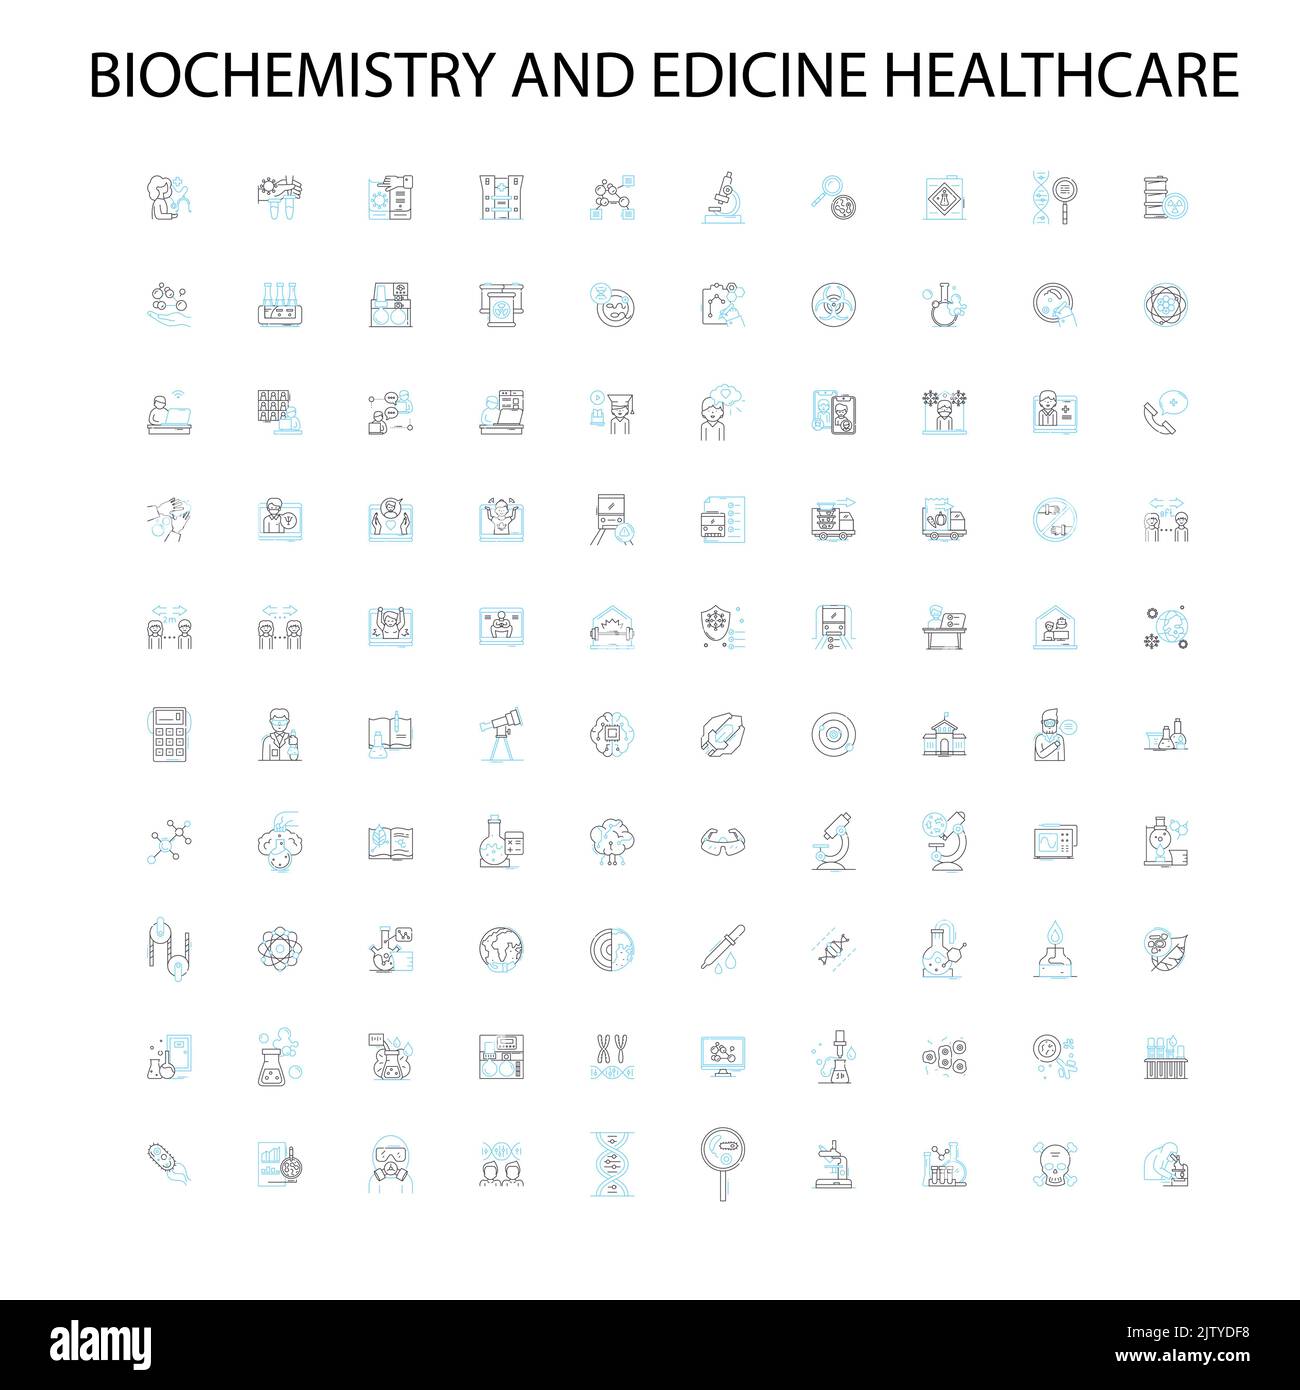 biochemistry and edicine healthcare icons, signs, outline symbols, concept linear illustration line collection Stock Vector